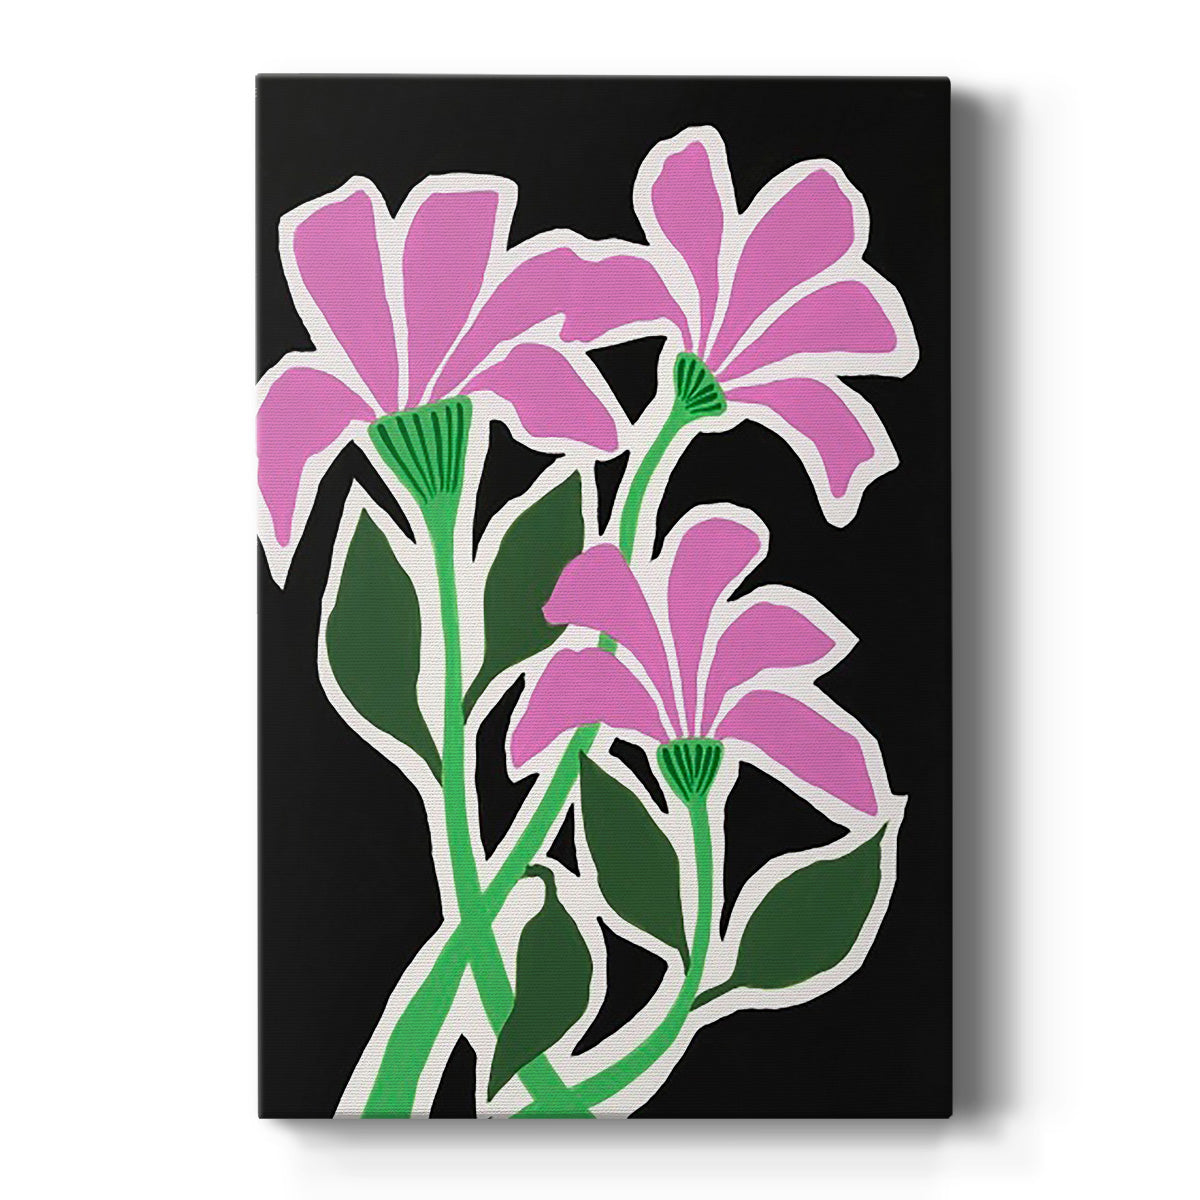 Pop Flowers V Premium Gallery Wrapped Canvas - Ready to Hang